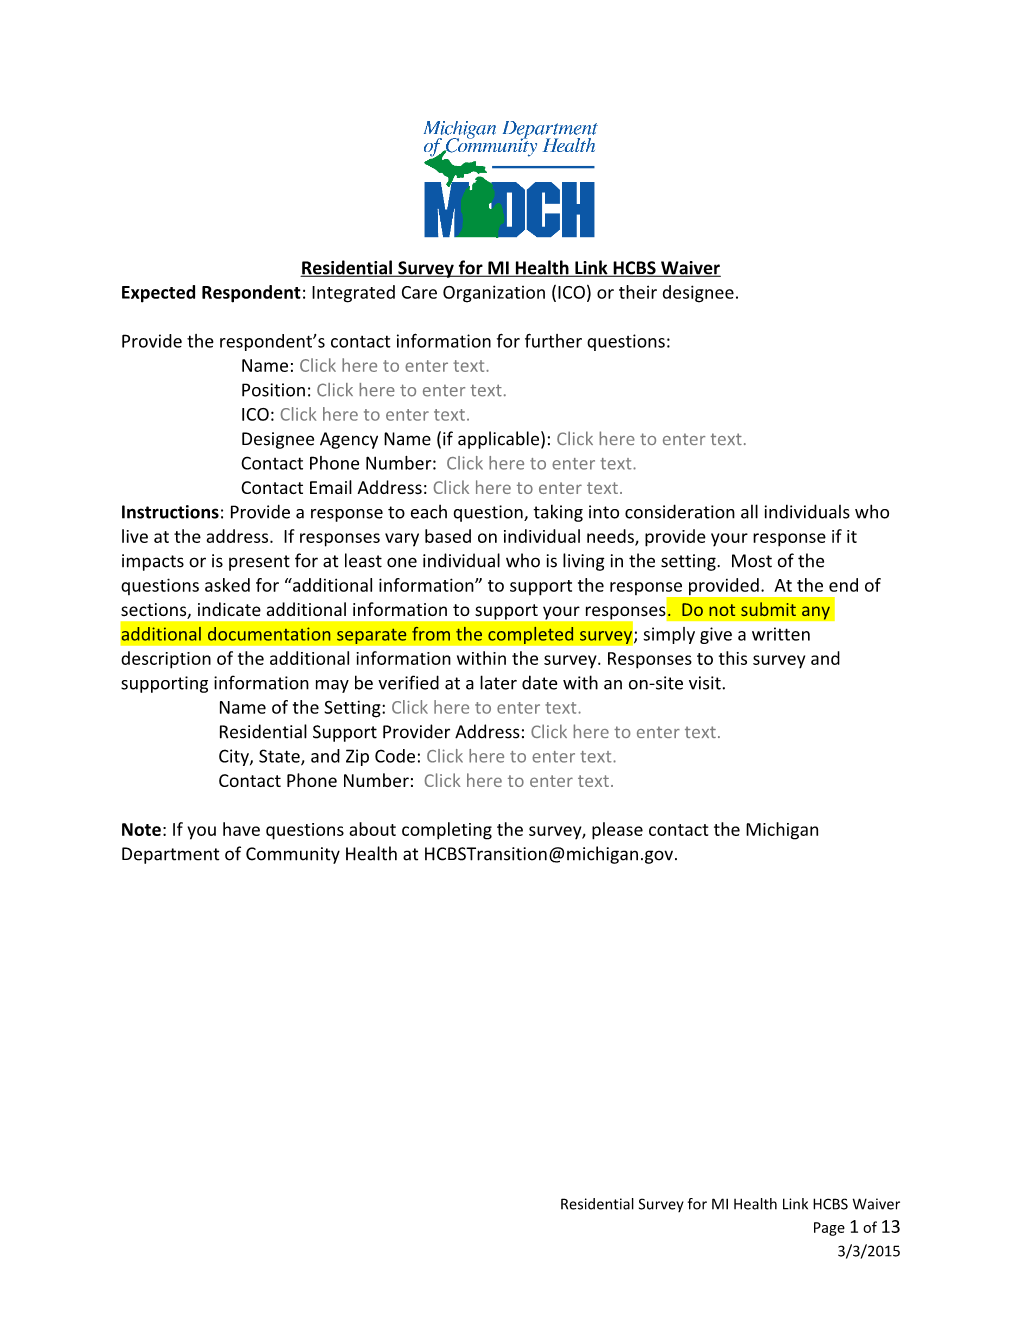 Residential Survey for MI Health Link HCBS Waiver